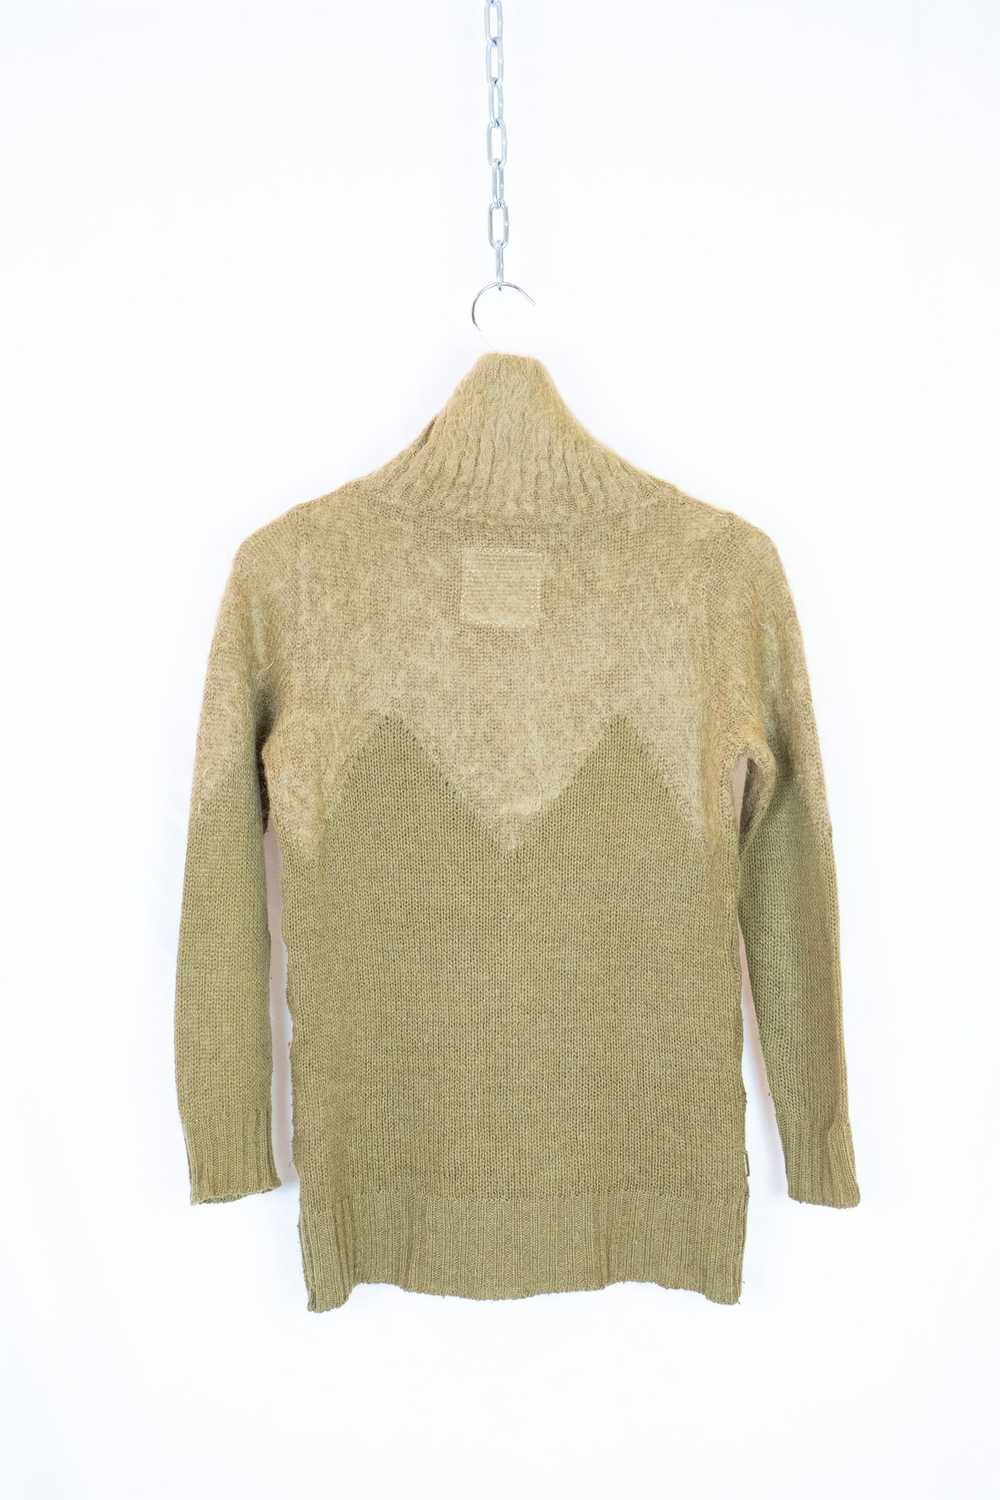 Undercover Undercover 00FW Sweater - image 2